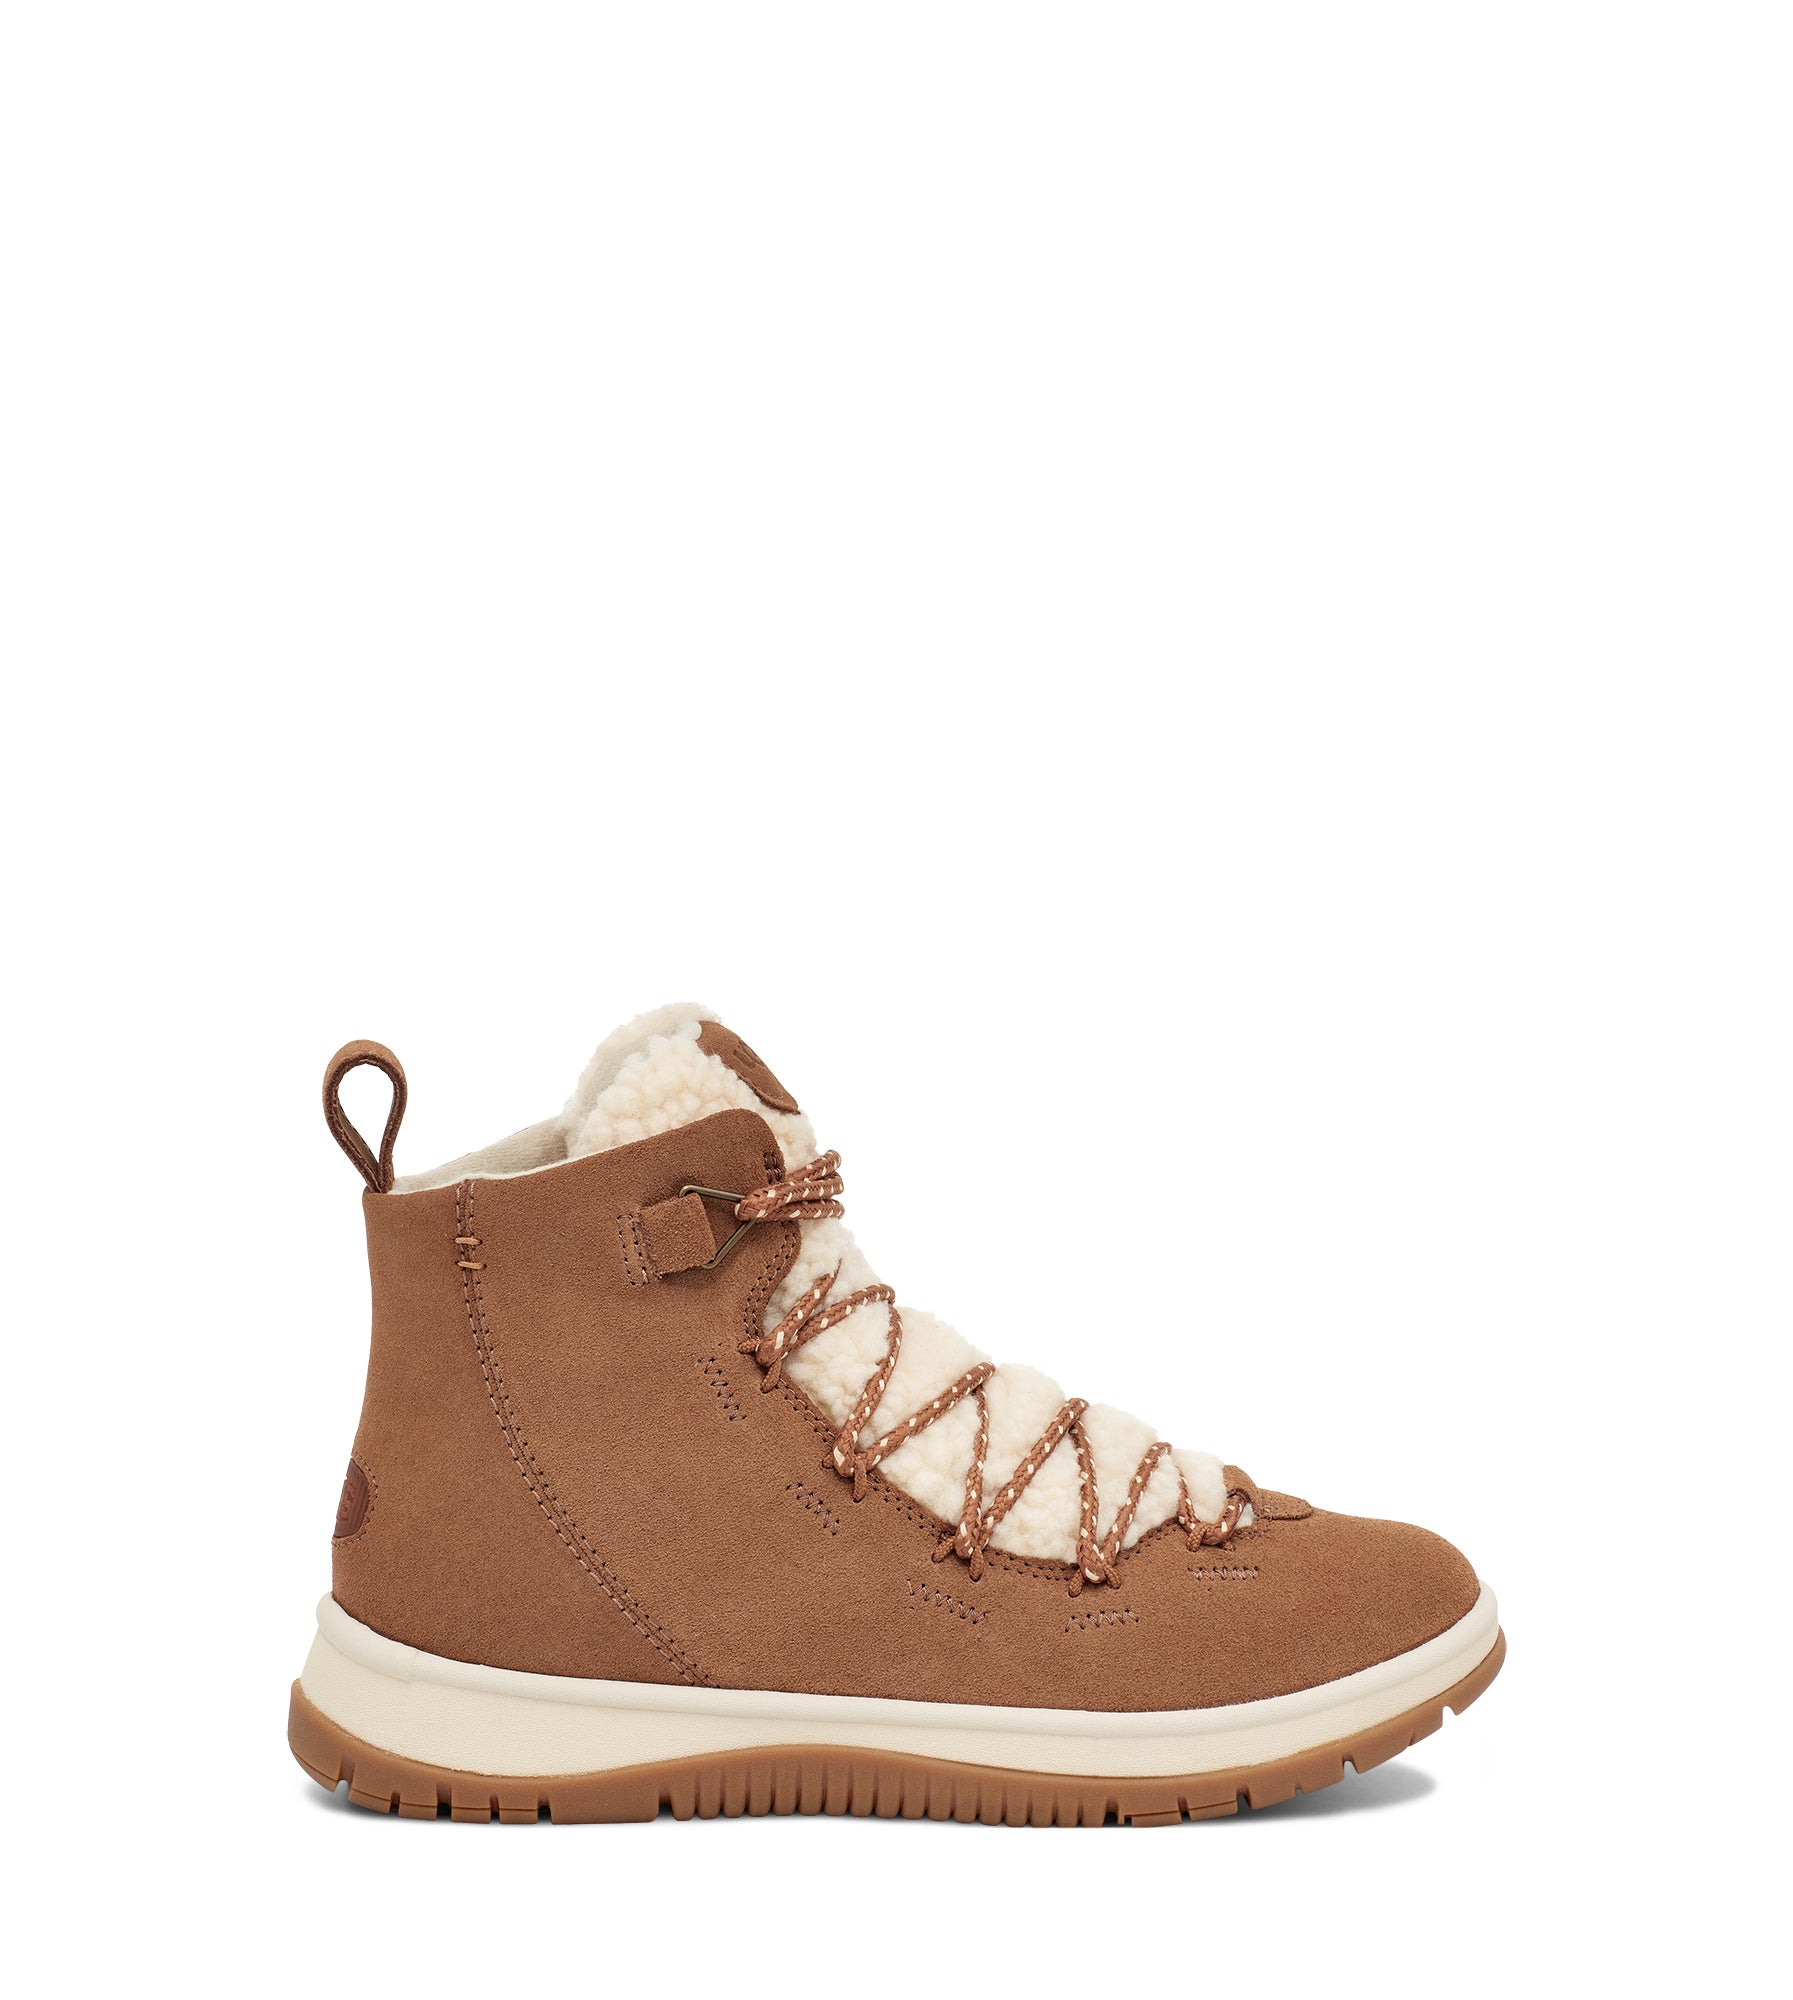 A sneaker-boot hybrid featuring timeless heritage details, seam-sealed waterproof suede, and a cozy plush wool blend, the Women's Ugg Lakesider easily stands out. One of the highlights is the curly UGG sheepskin along the tongue. Lined in Ugg's softest fleece with a White Spider Rubber sole for enhanced traction in dry, wet, and icy conditions, this lace-up statement silhouette pairs with all your favorite winter looks.